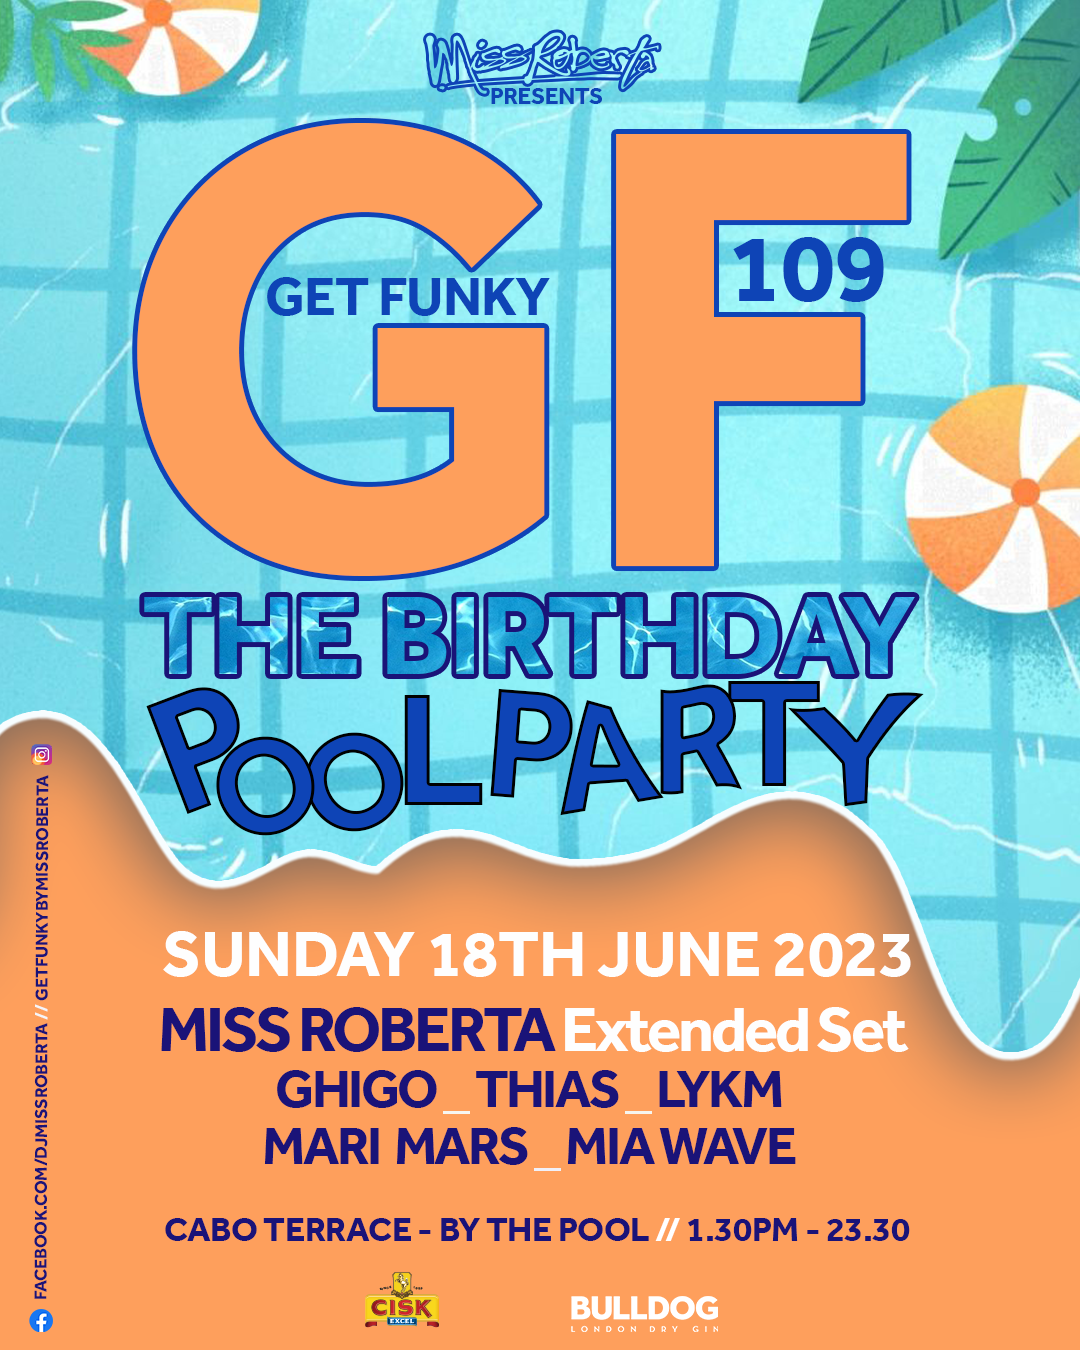 GET FUNKY 109 "The Birthday Pool Party" poster